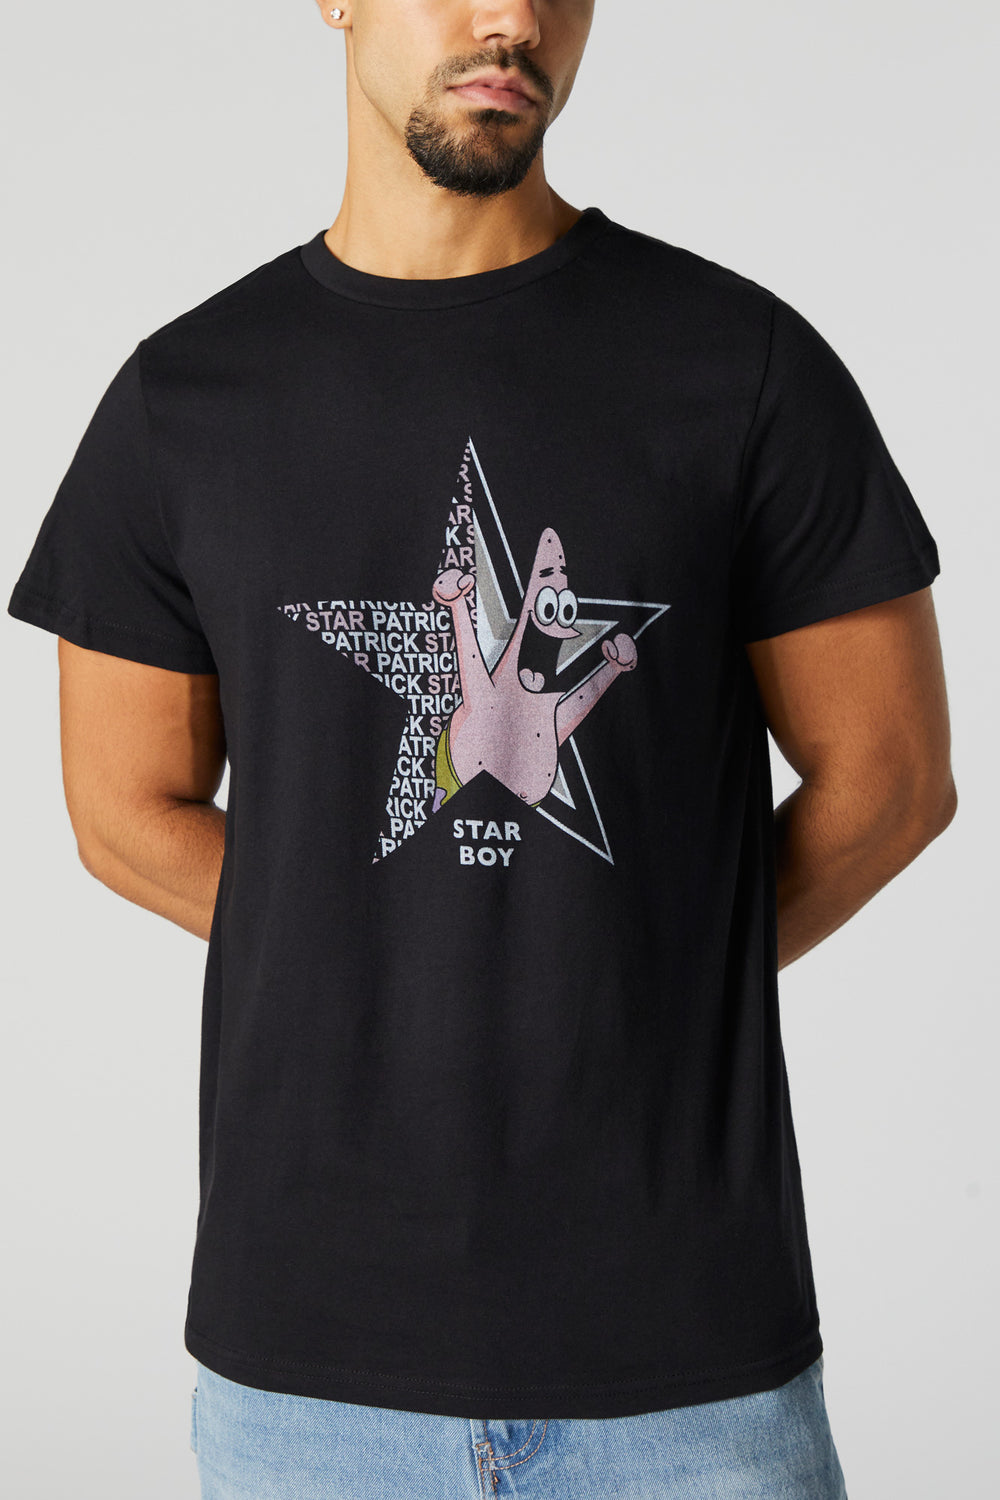 Patrick Starboy Graphic T-Shirt Patrick Starboy Graphic T-Shirt 2